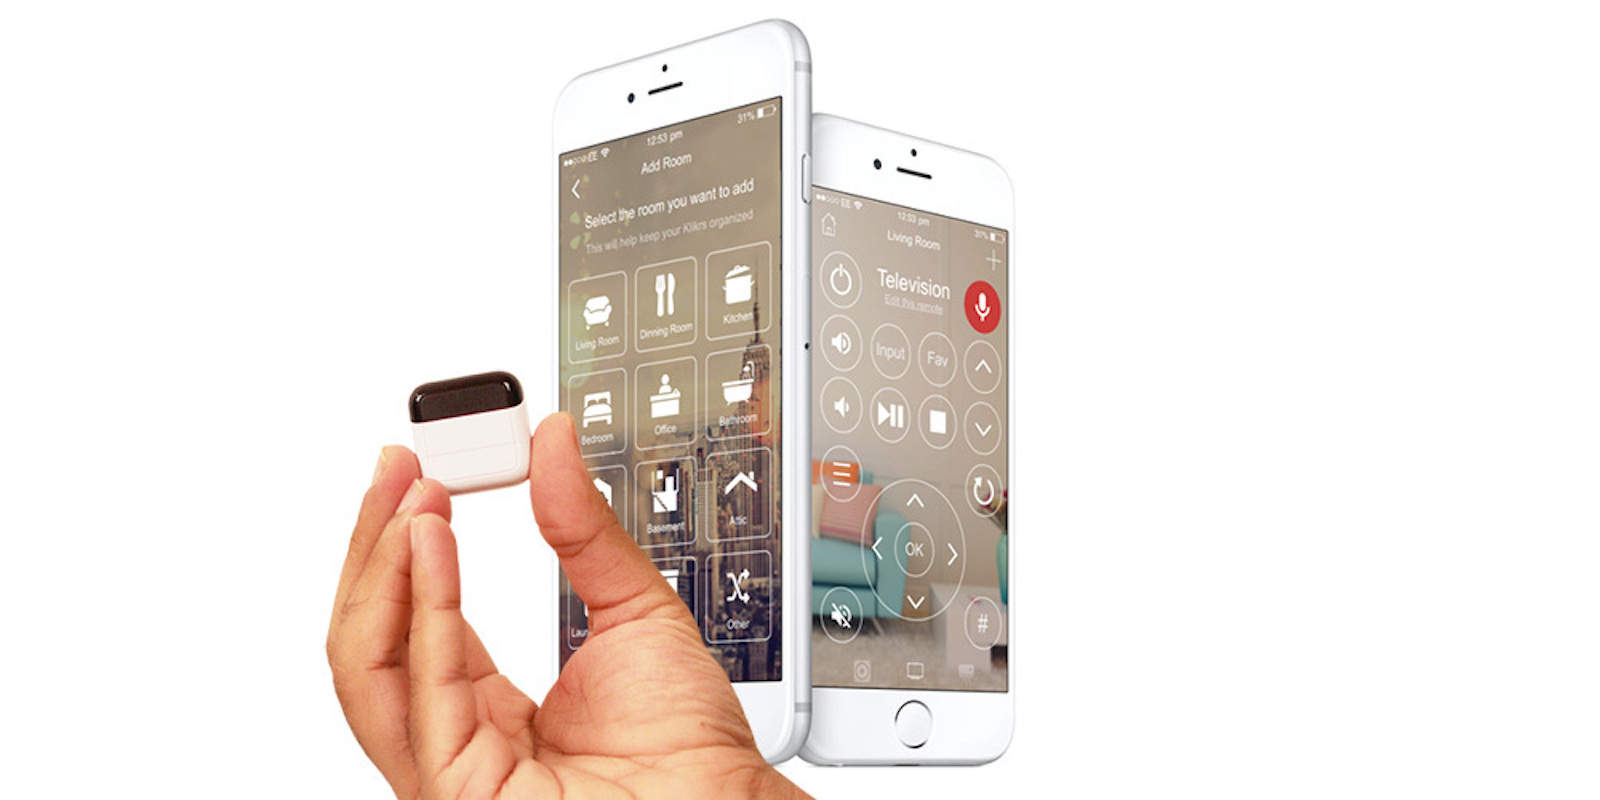 This coin-sized device makes your home's devices controllable right from your phone